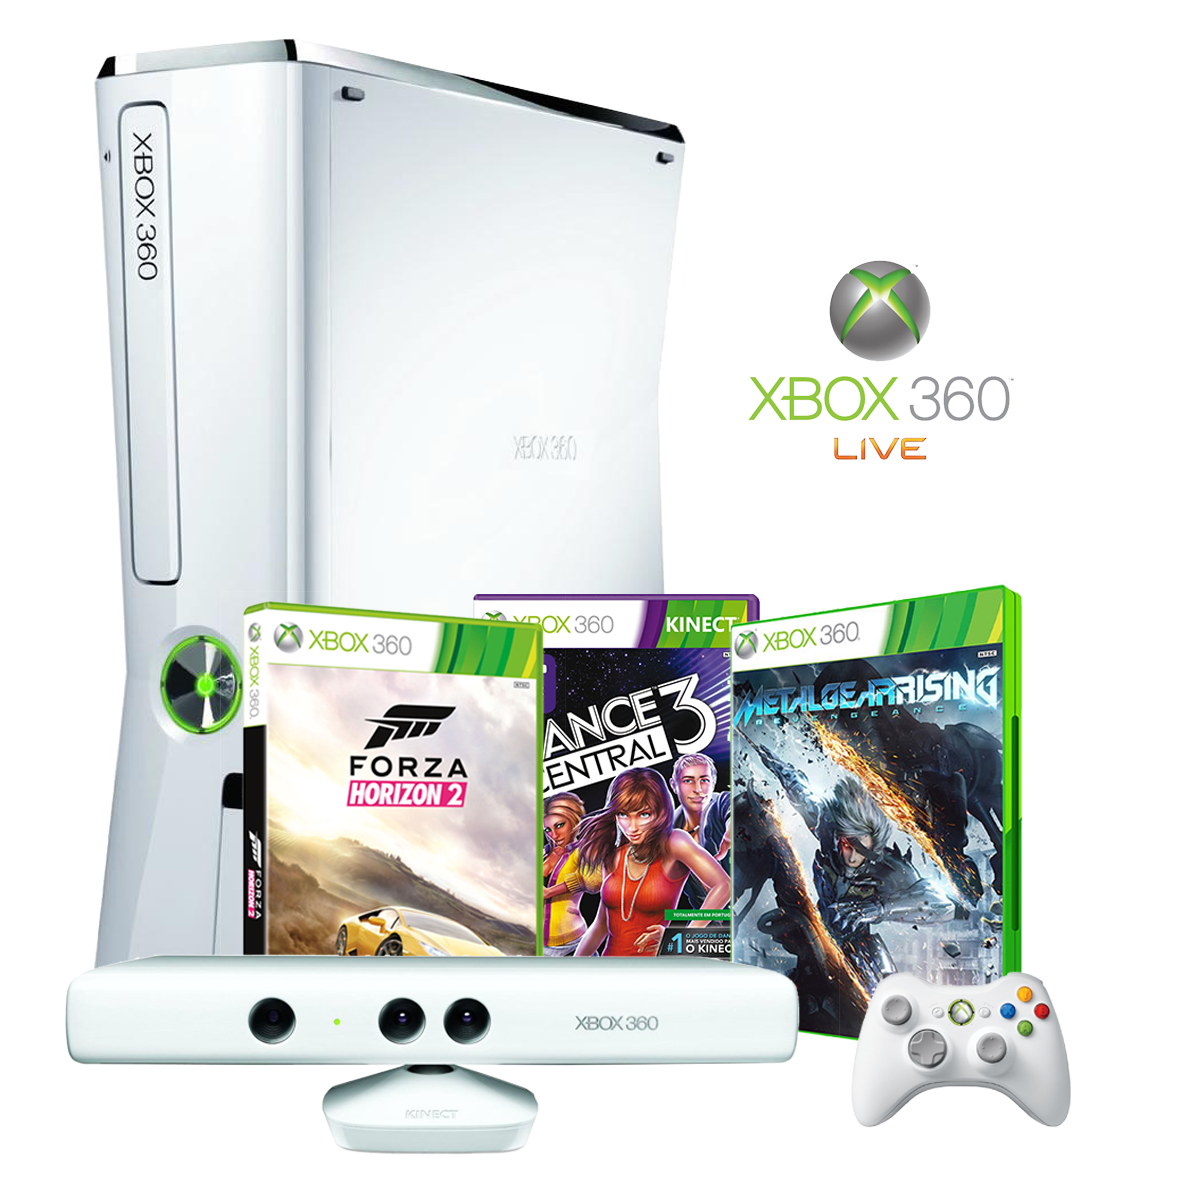 XBOX 360 + RGH Freestyle + 1 controle + 1 Kinect GRÁTIS +25GAMES